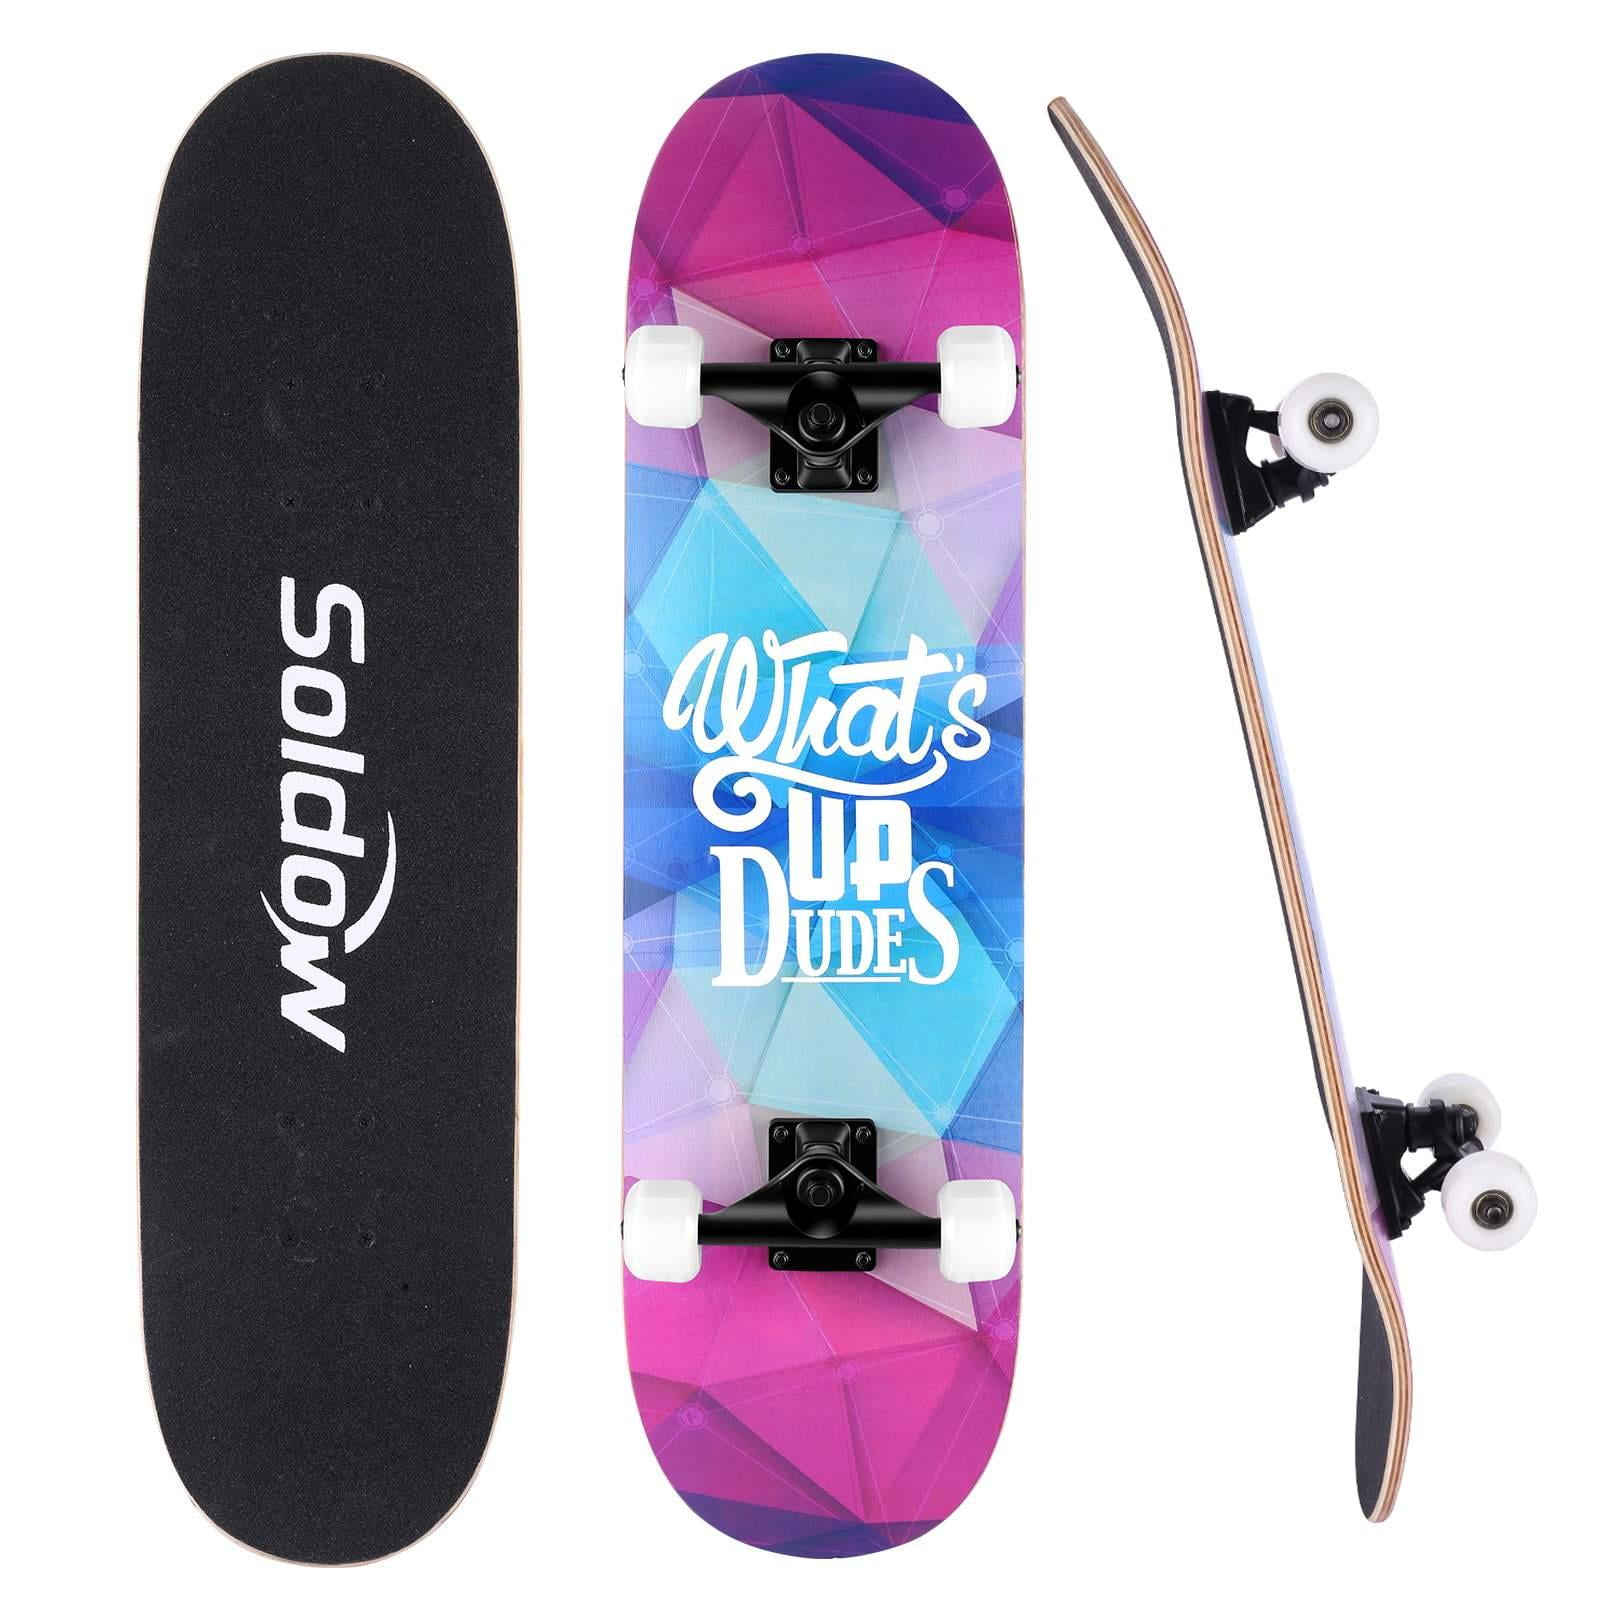 Details about   22' Complete Skateboards Mini Cruiser Skateboard for Beginners Teens Caroma 